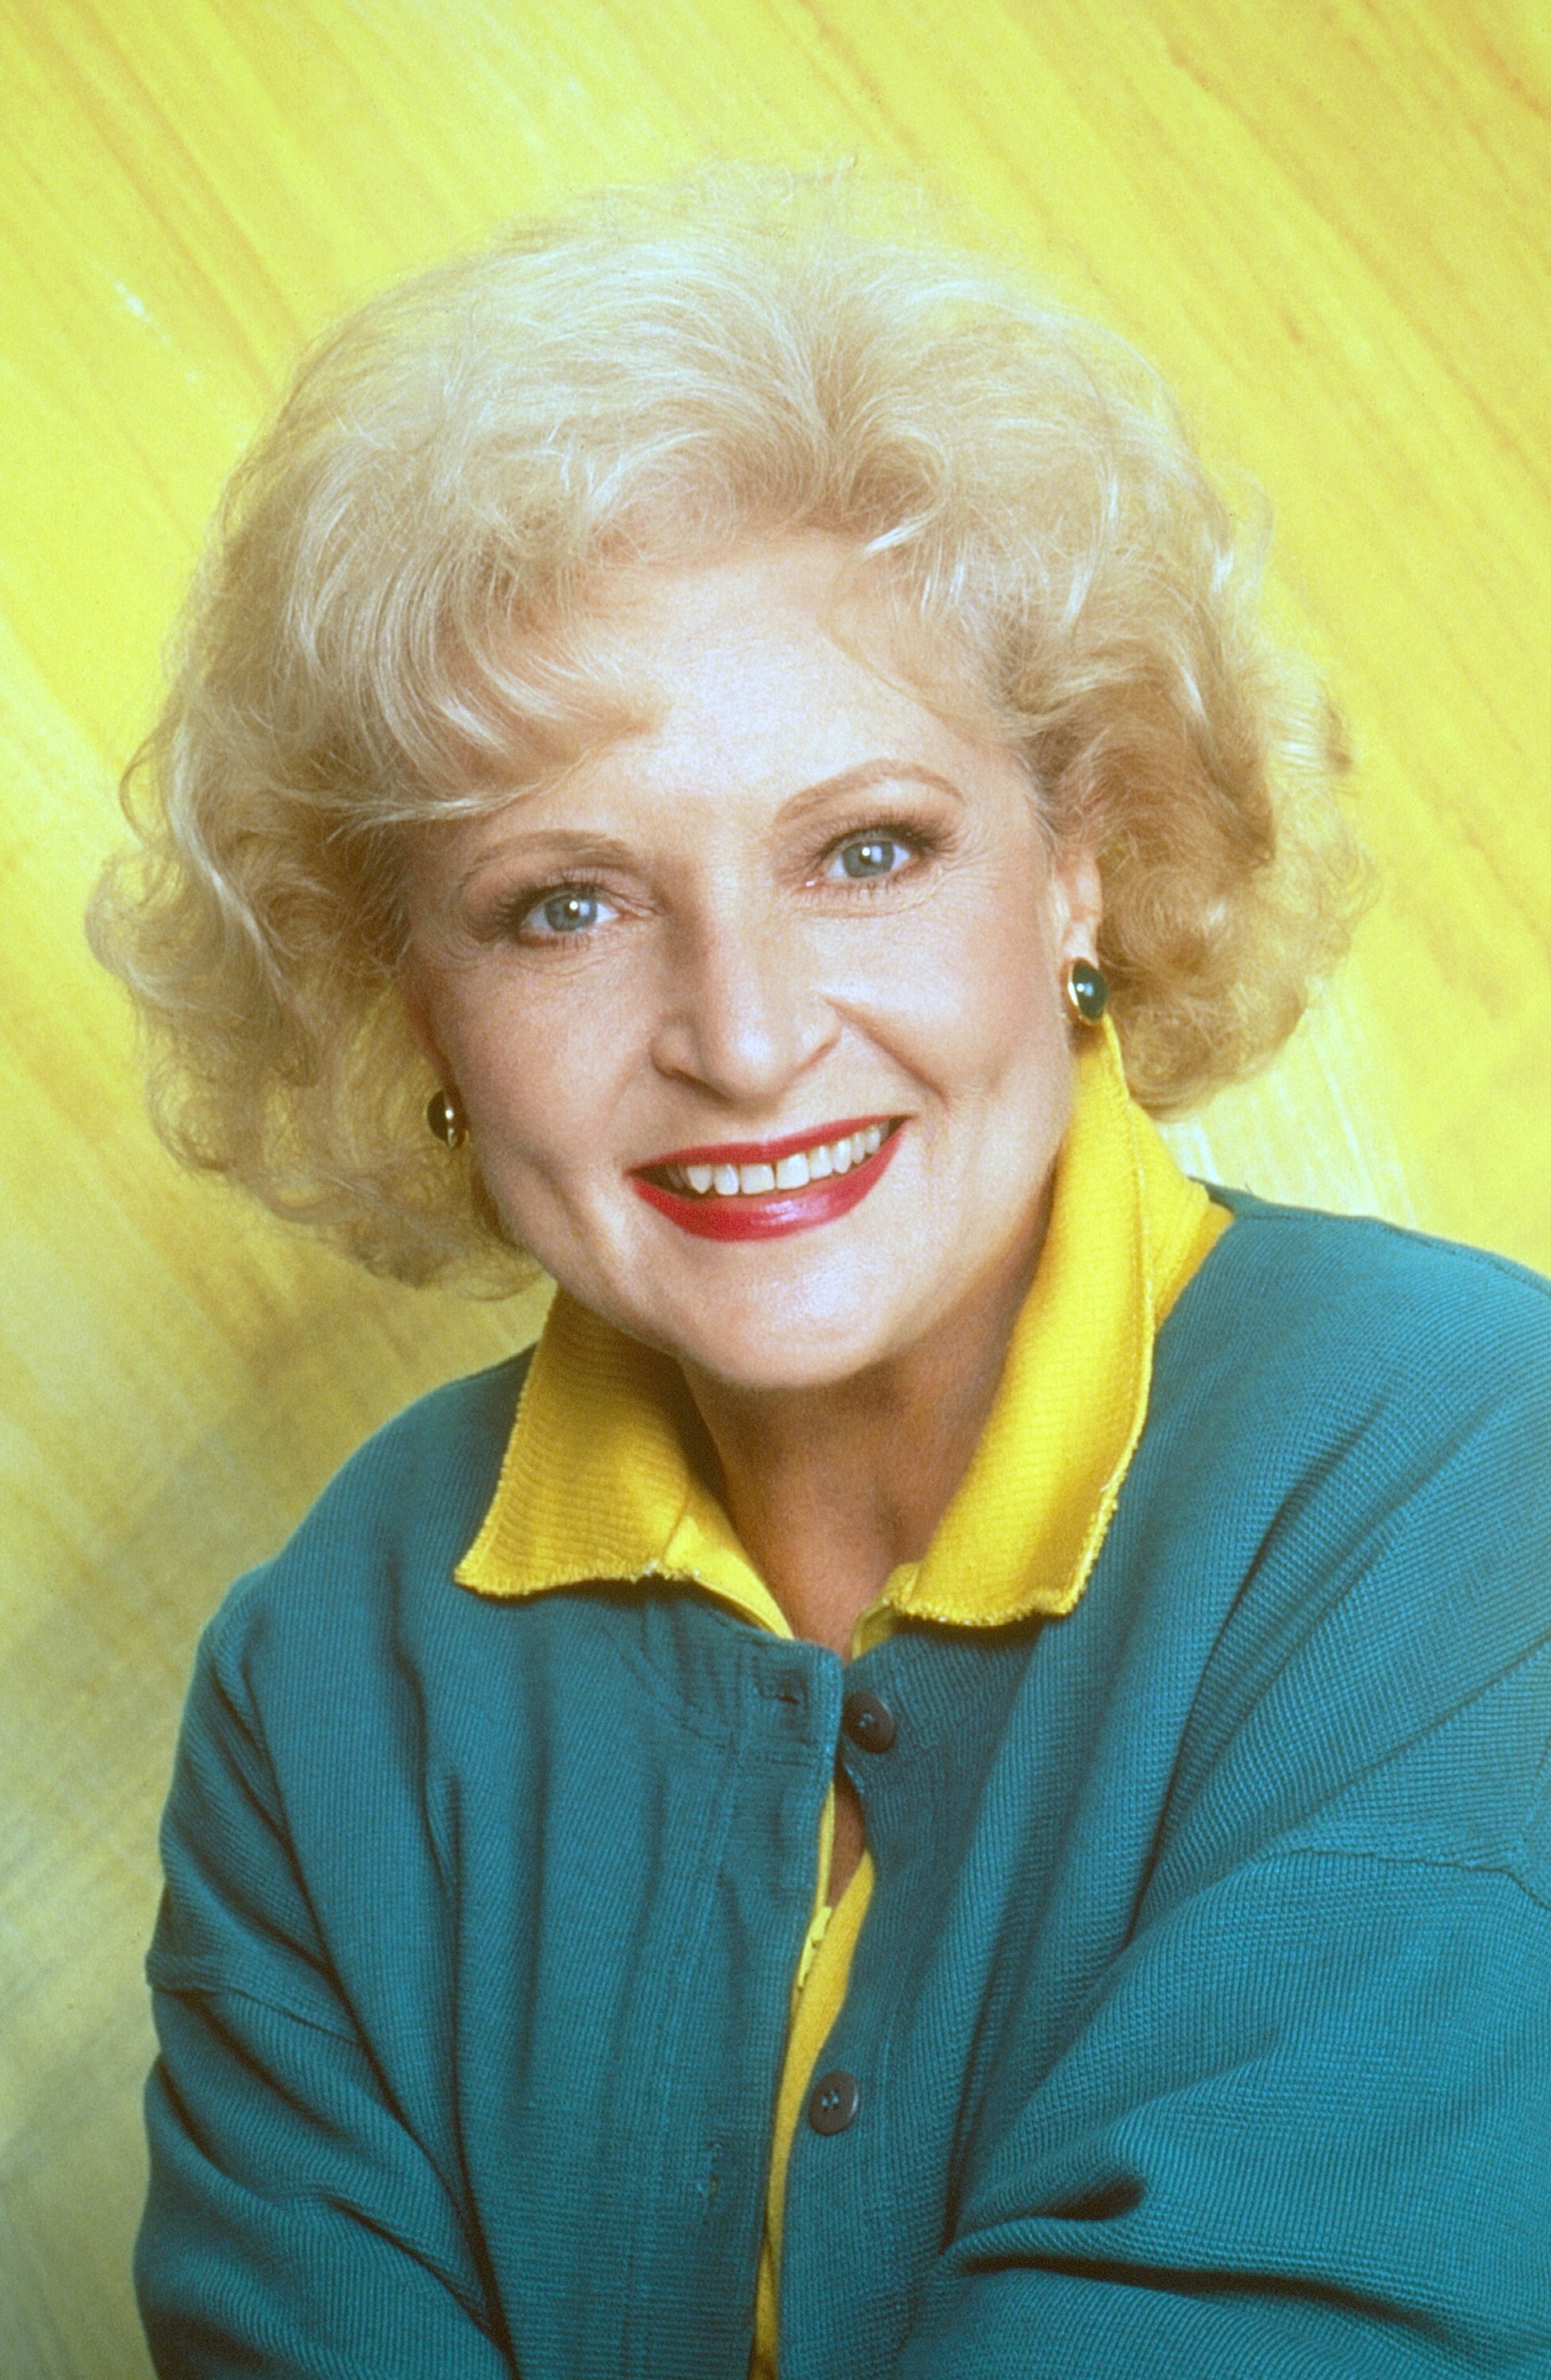 betty-white-no-more-legendary-performer-dead-at-99-the-cultured-nerd